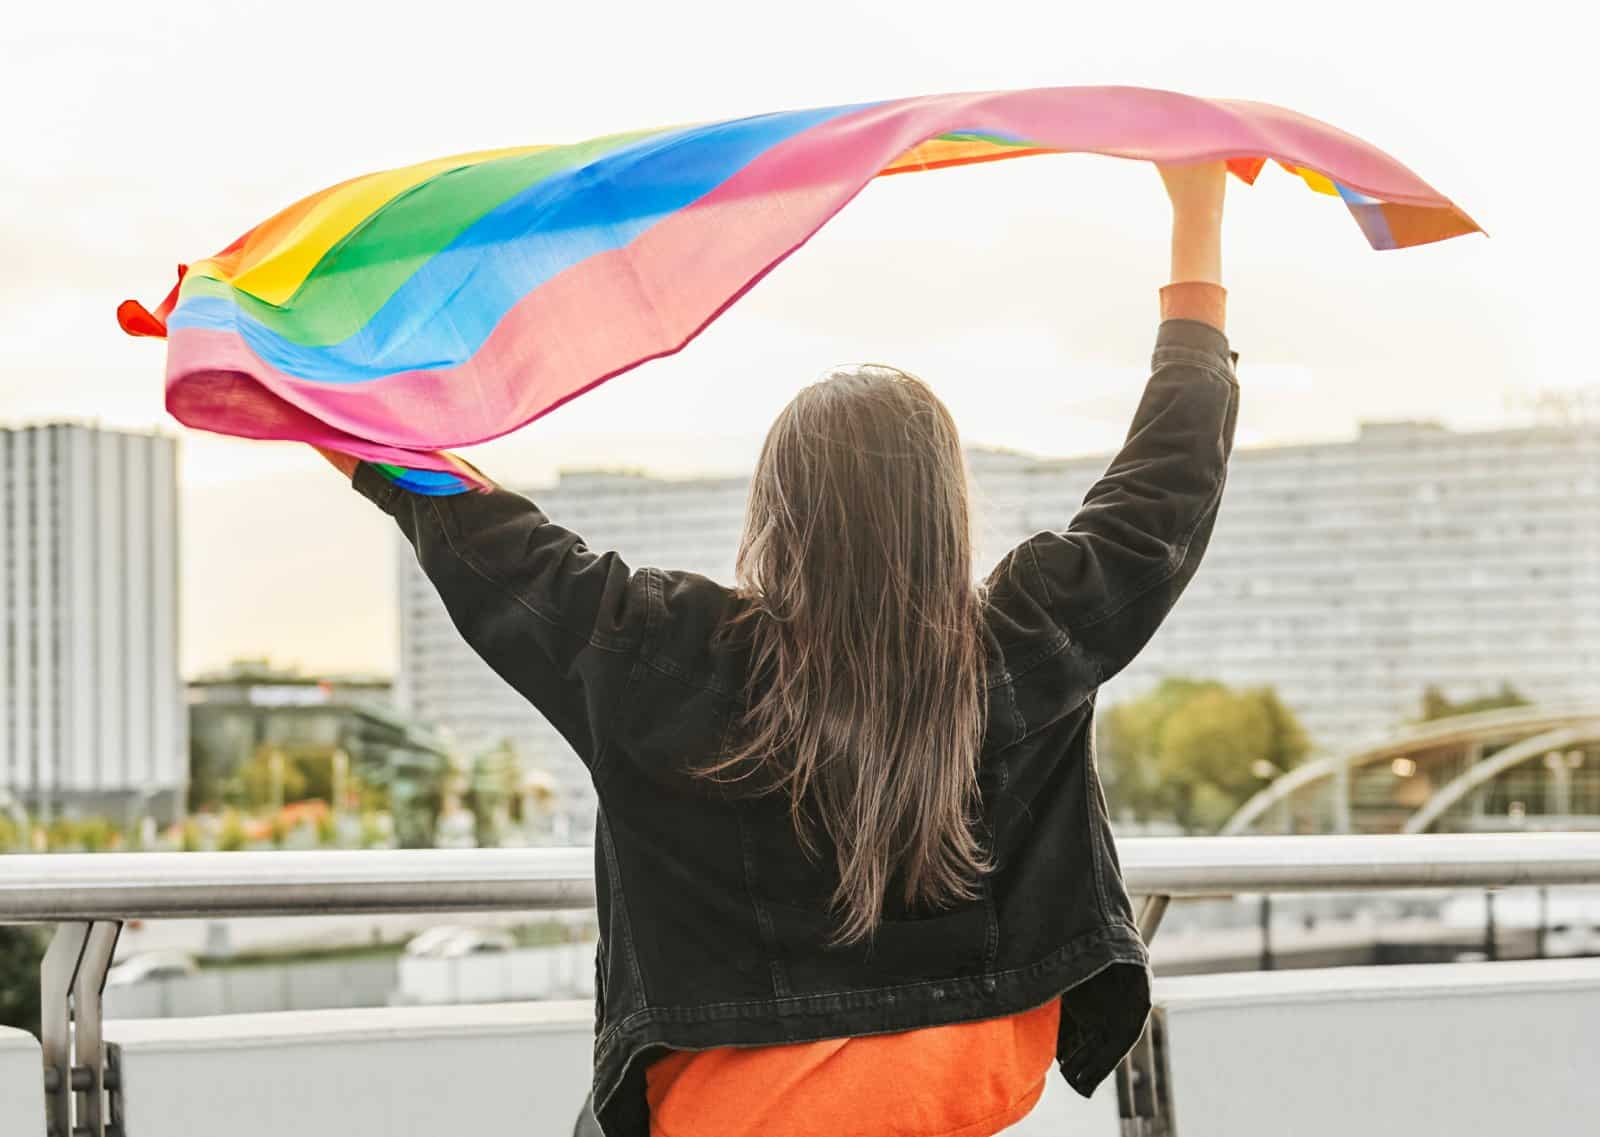 Image Credit: Shutterstock / gpointstudio <p><span>The renowned anthropologist had relationships with both men and women, but the full extent of her sexual orientation only became known after her death.</span></p>